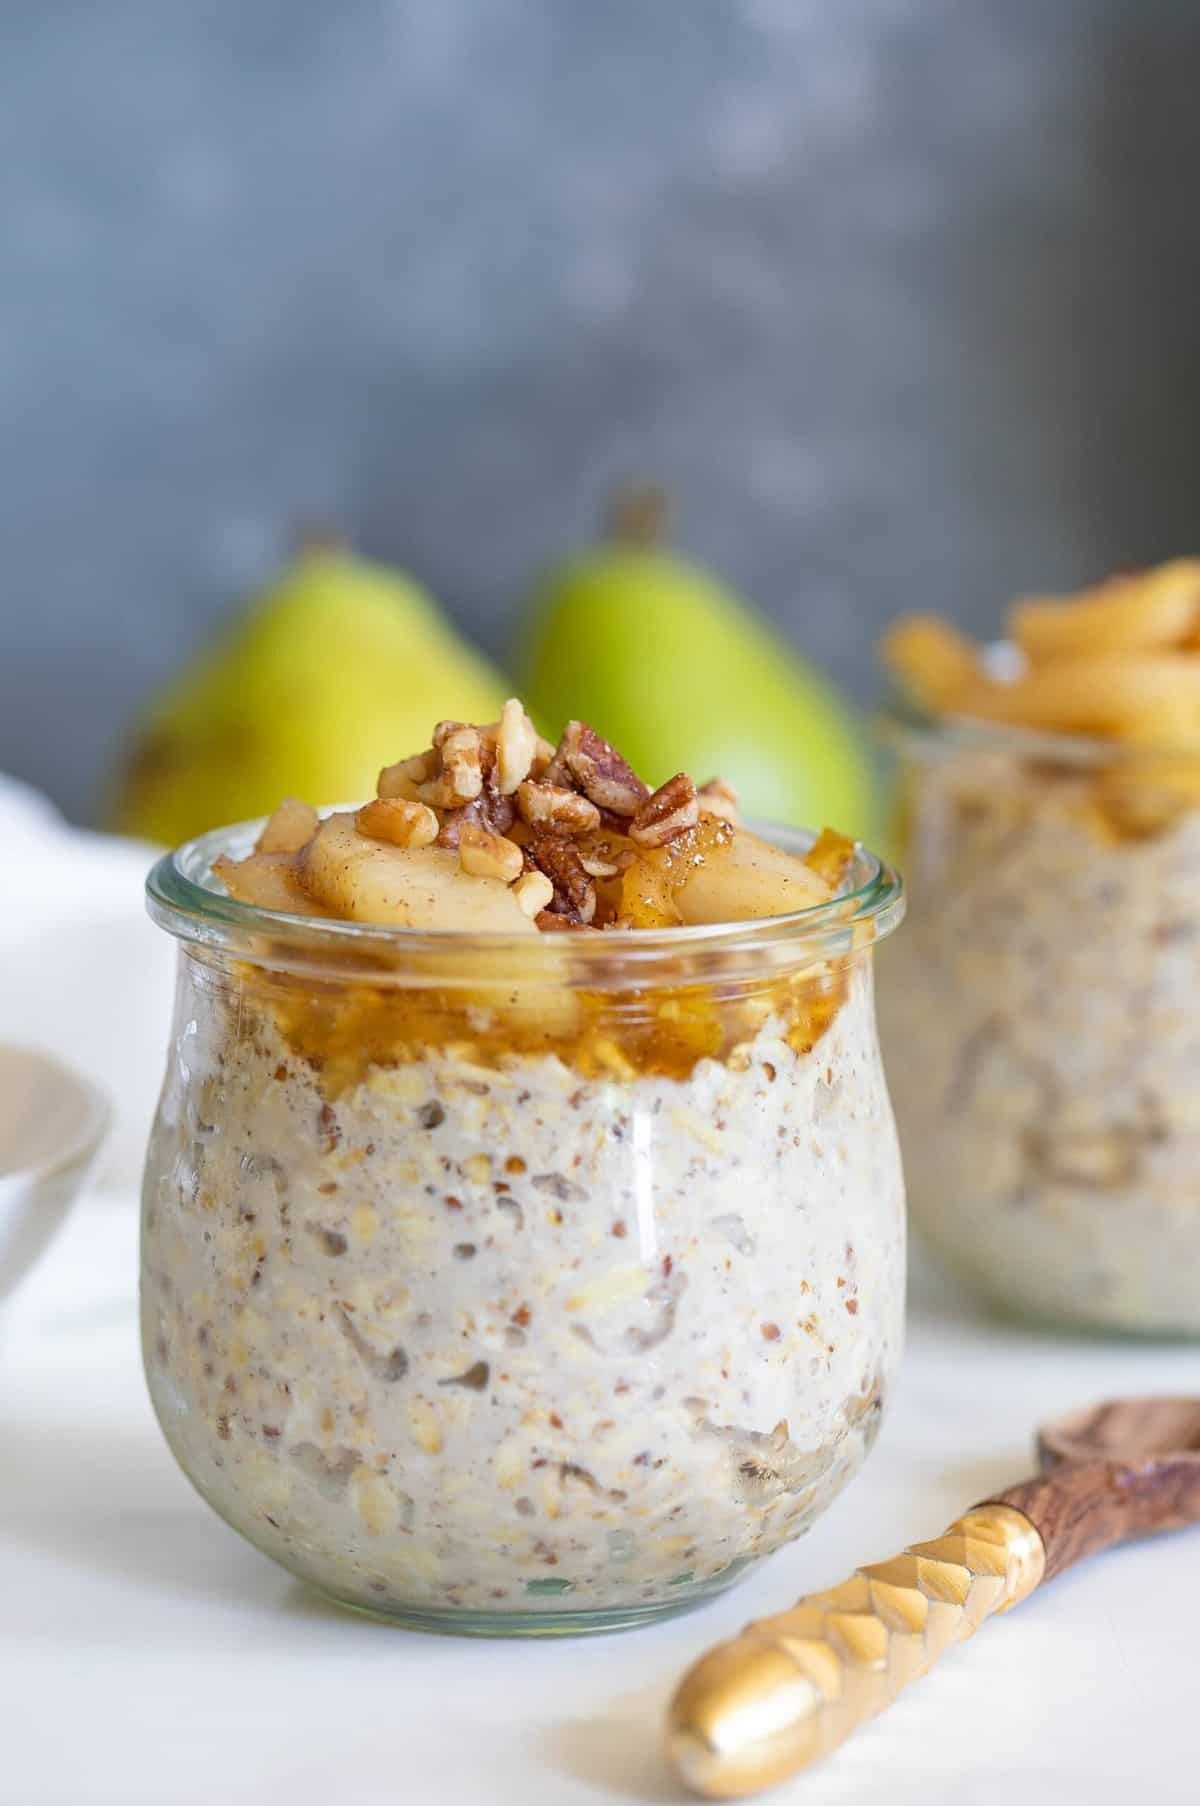 https://hips.hearstapps.com/hmg-prod/images/overnight-oats-recipes-vanilla-overnight-oats-with-maple-spiced-pears-1658413523.jpeg